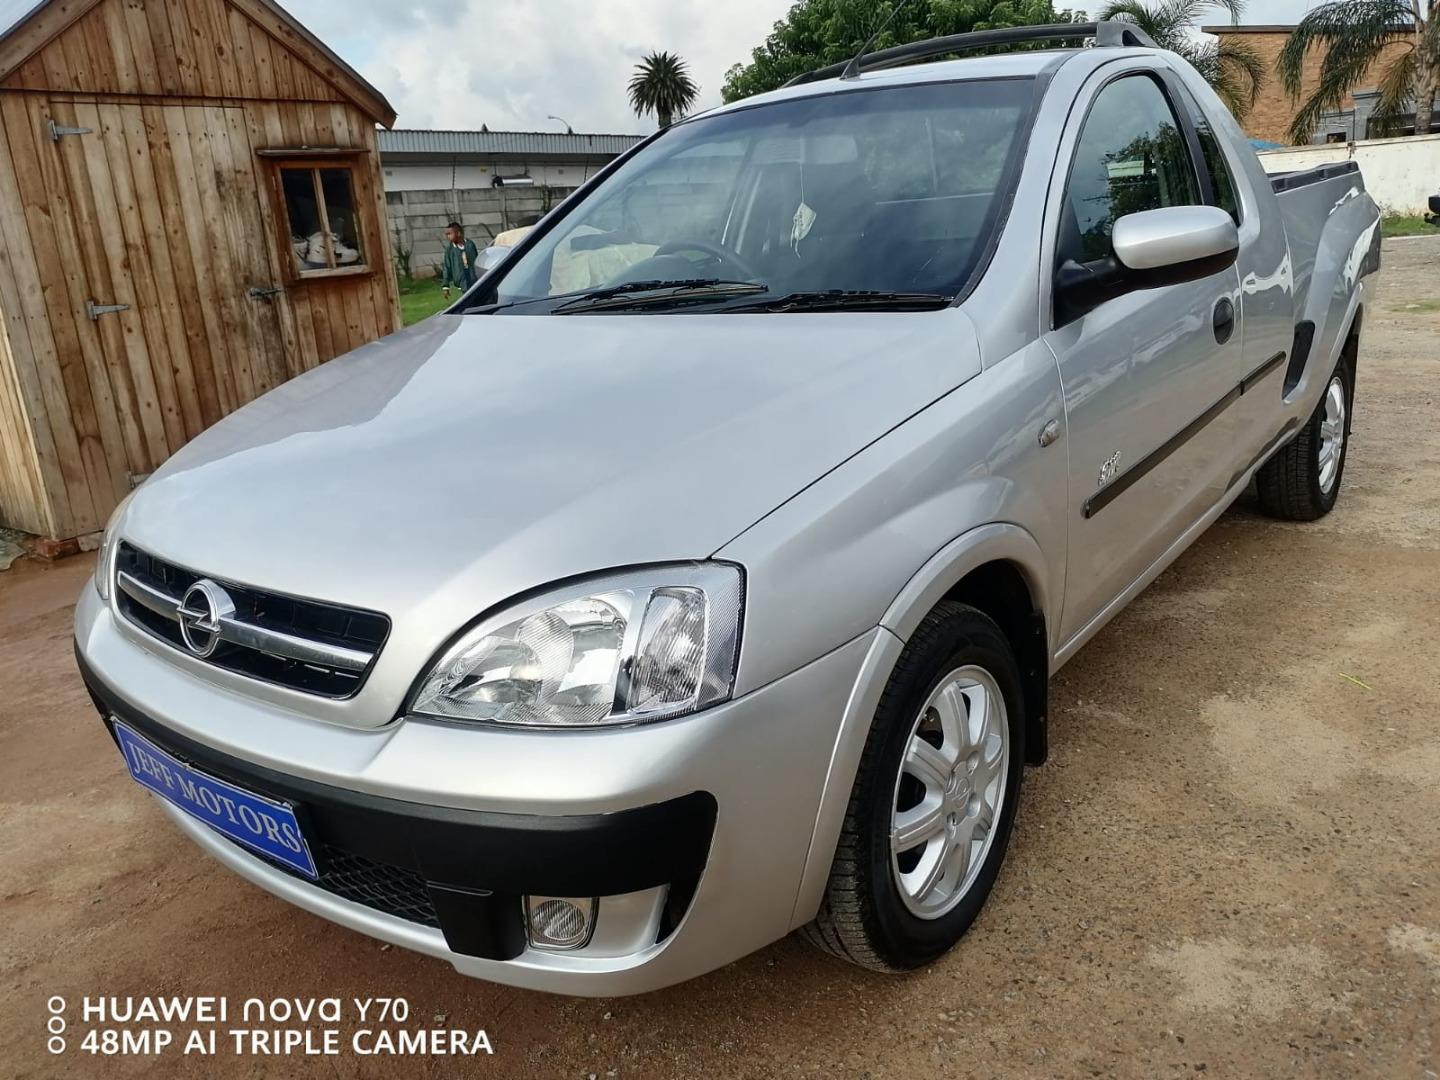 2009 Opel Corsa Utility 1.4 For Sale